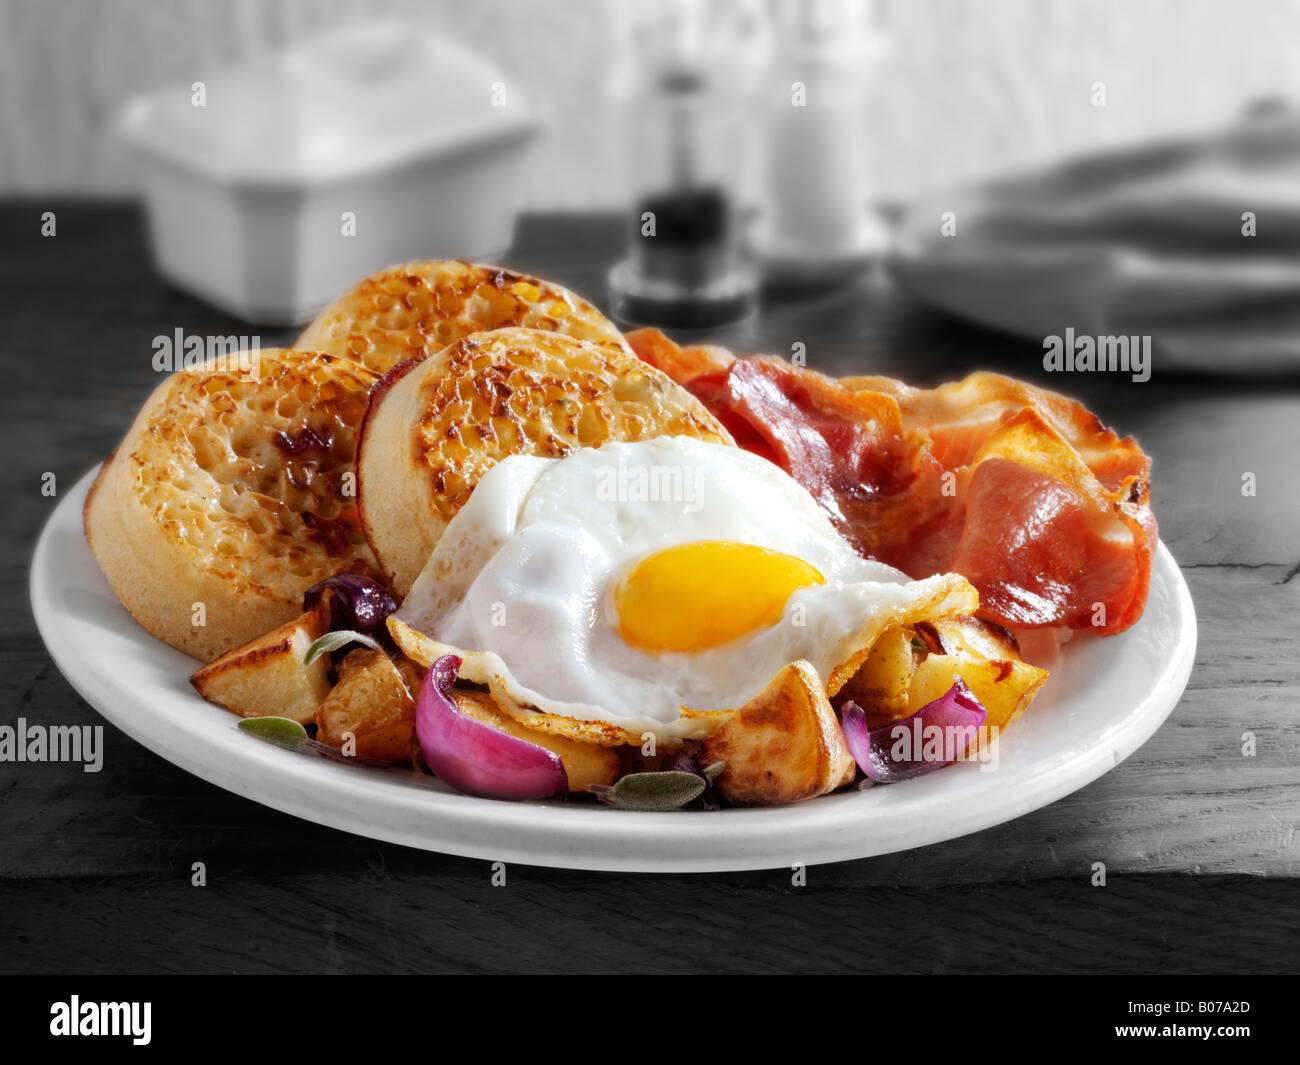 Full English Breakfast with crumpets, served on a white plate in a table setting - Fried egg, bacon, sautéed potatoes and crumpets Stock Photo